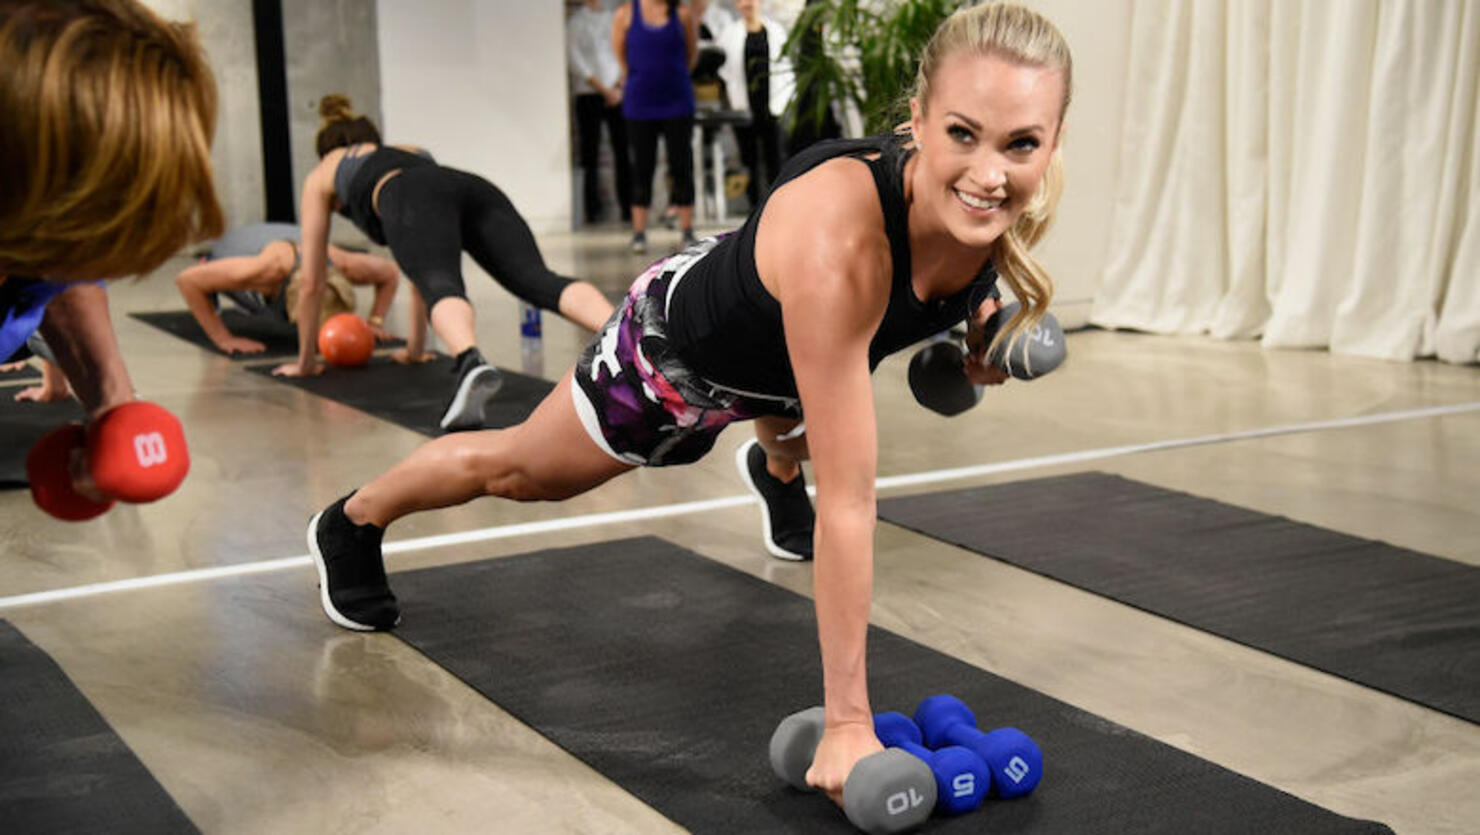 Carrie Underwood Says Cute Workout Clothes Give Her A 'Little Boost